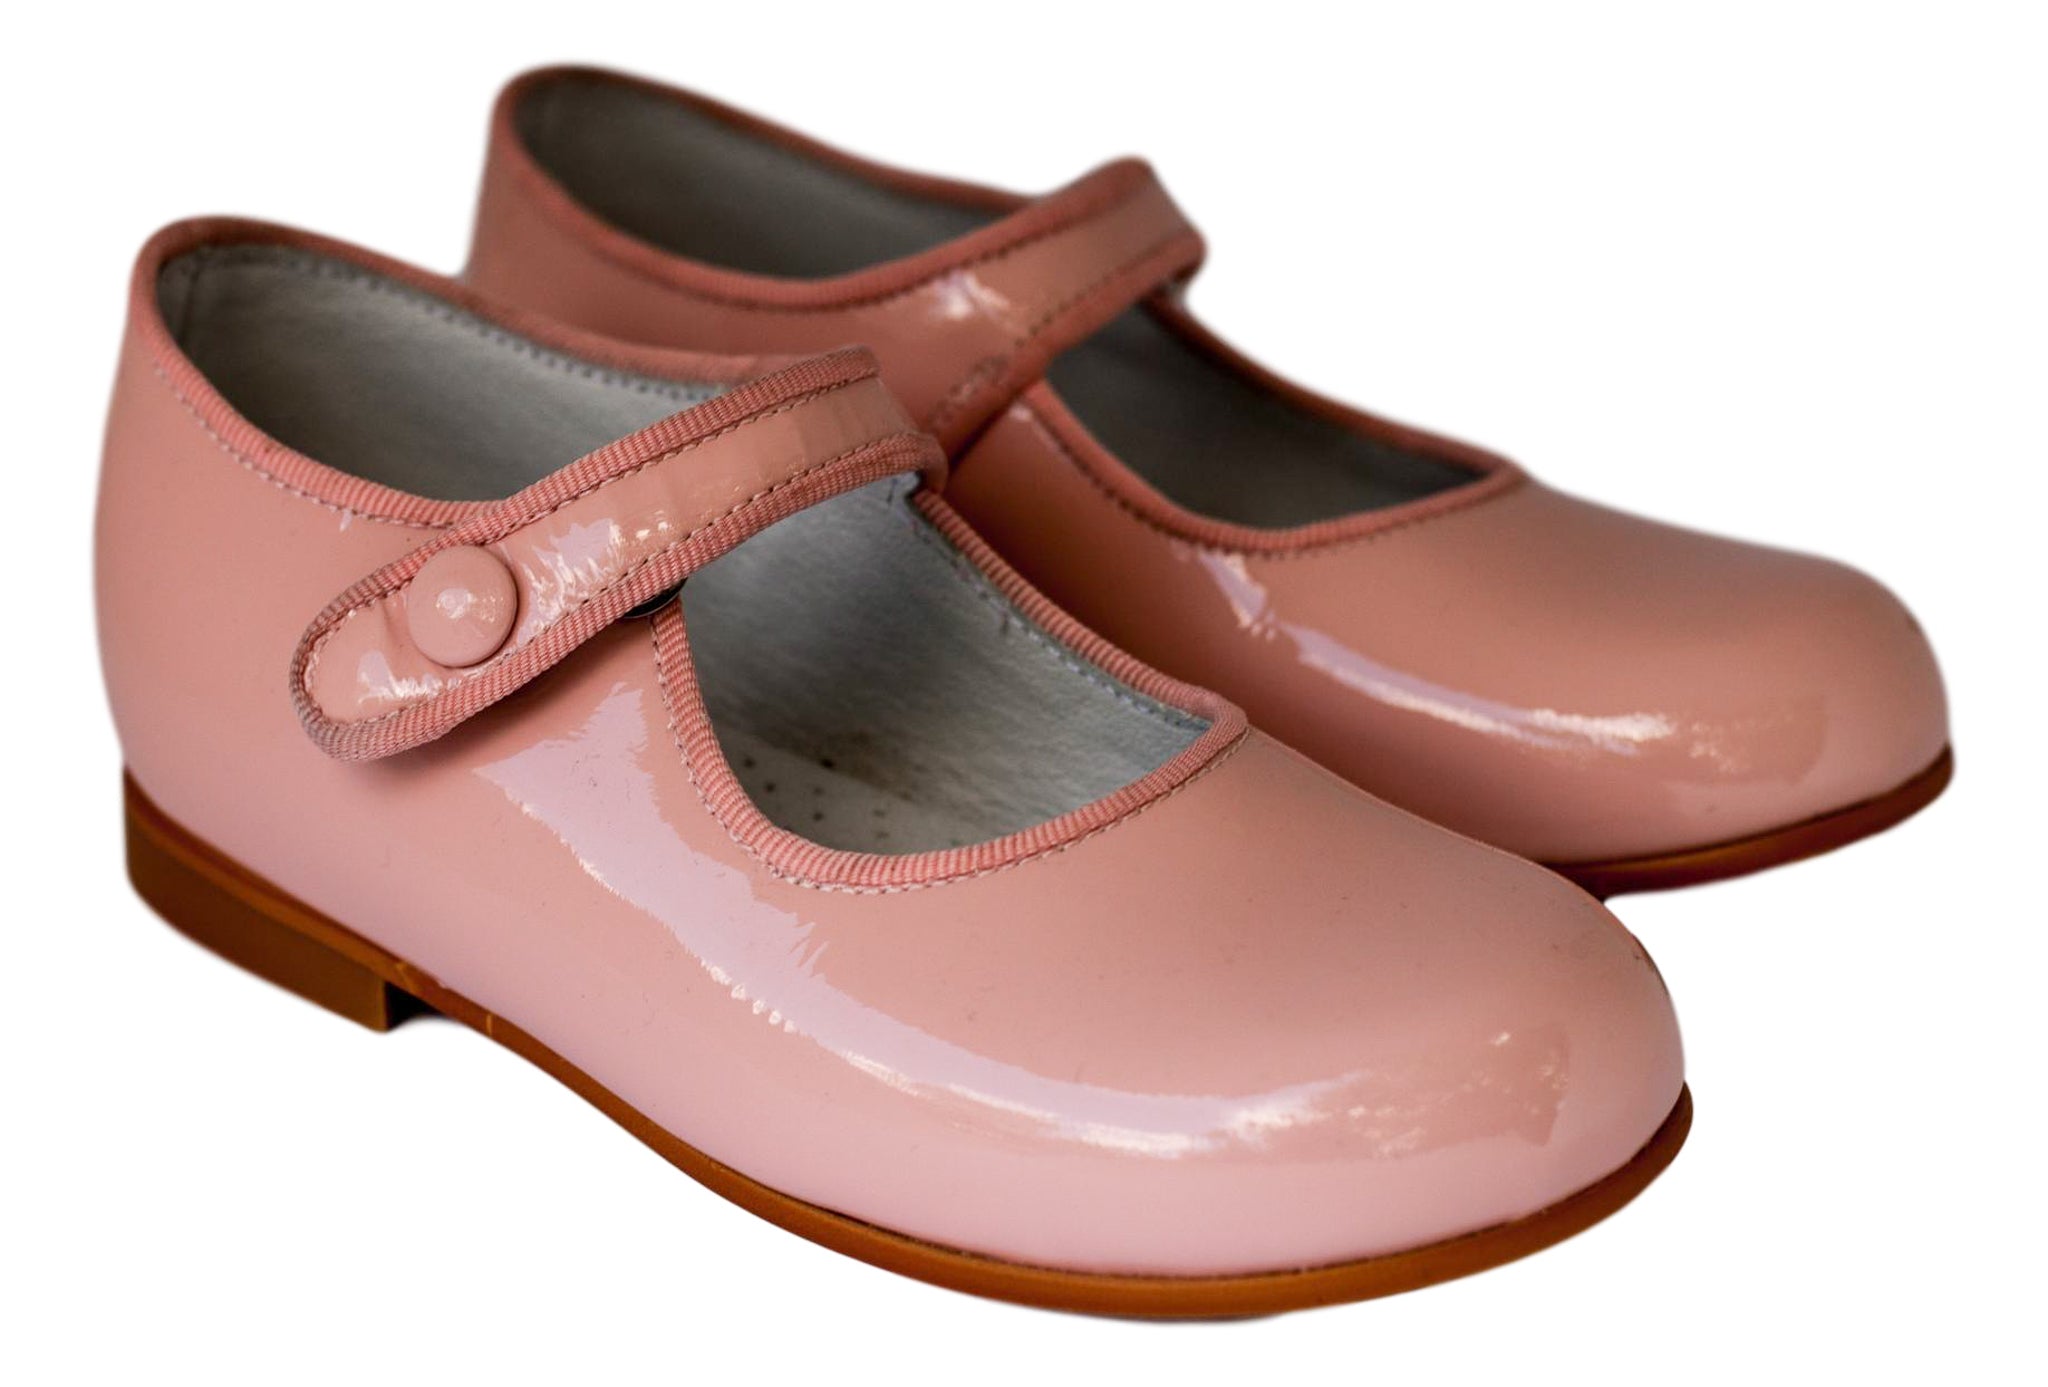 hopscotch baby girl shoes